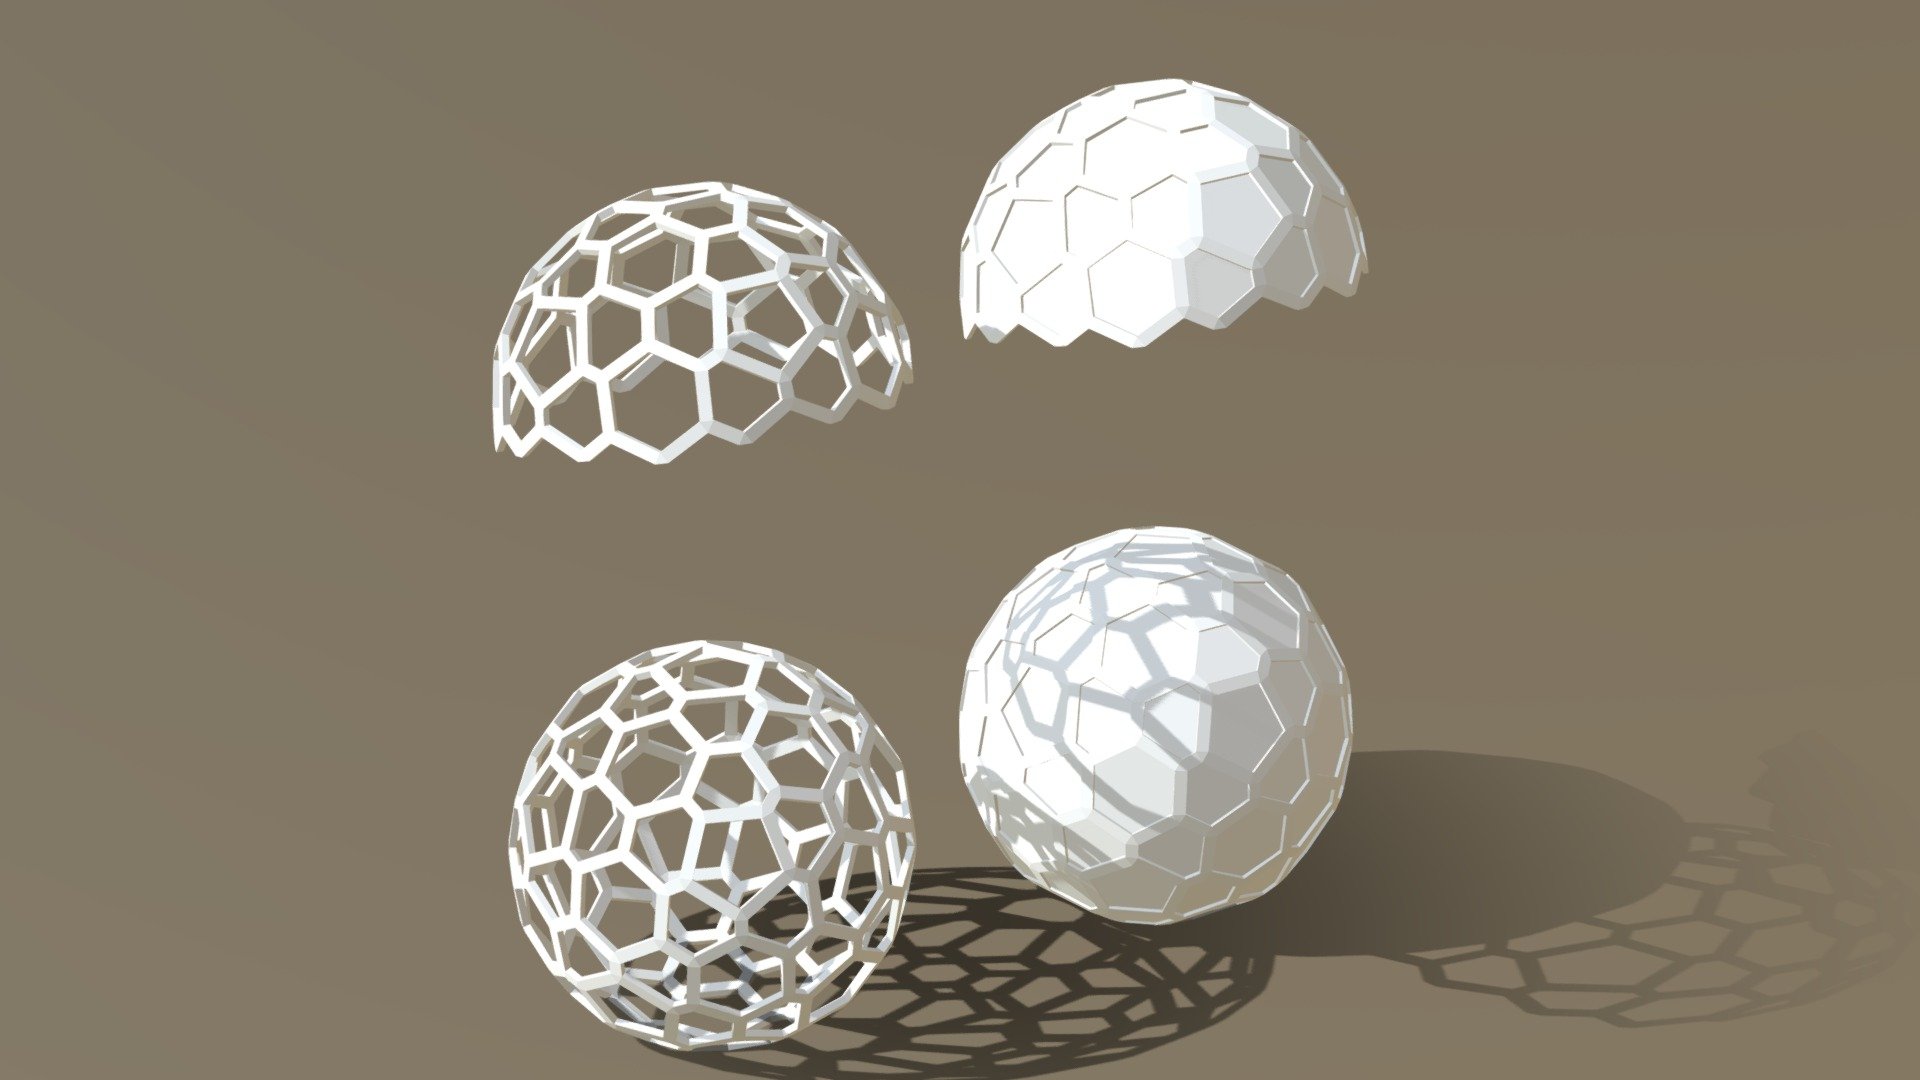 Honeycomb sphere looks like honeycomb cells made in ball form.  High quality polygonal 3d model base is icosahedron and made as decor.

This model  includes four variations:
sphere frame | sphere frame filled | half sphere – dome frame  | half sphere – dome frame filled

Geometric sphere 3D model can be used for 3D printing, Intereior designing, Decorations, Games, Digital desing, Digital Prints and many more 3d model